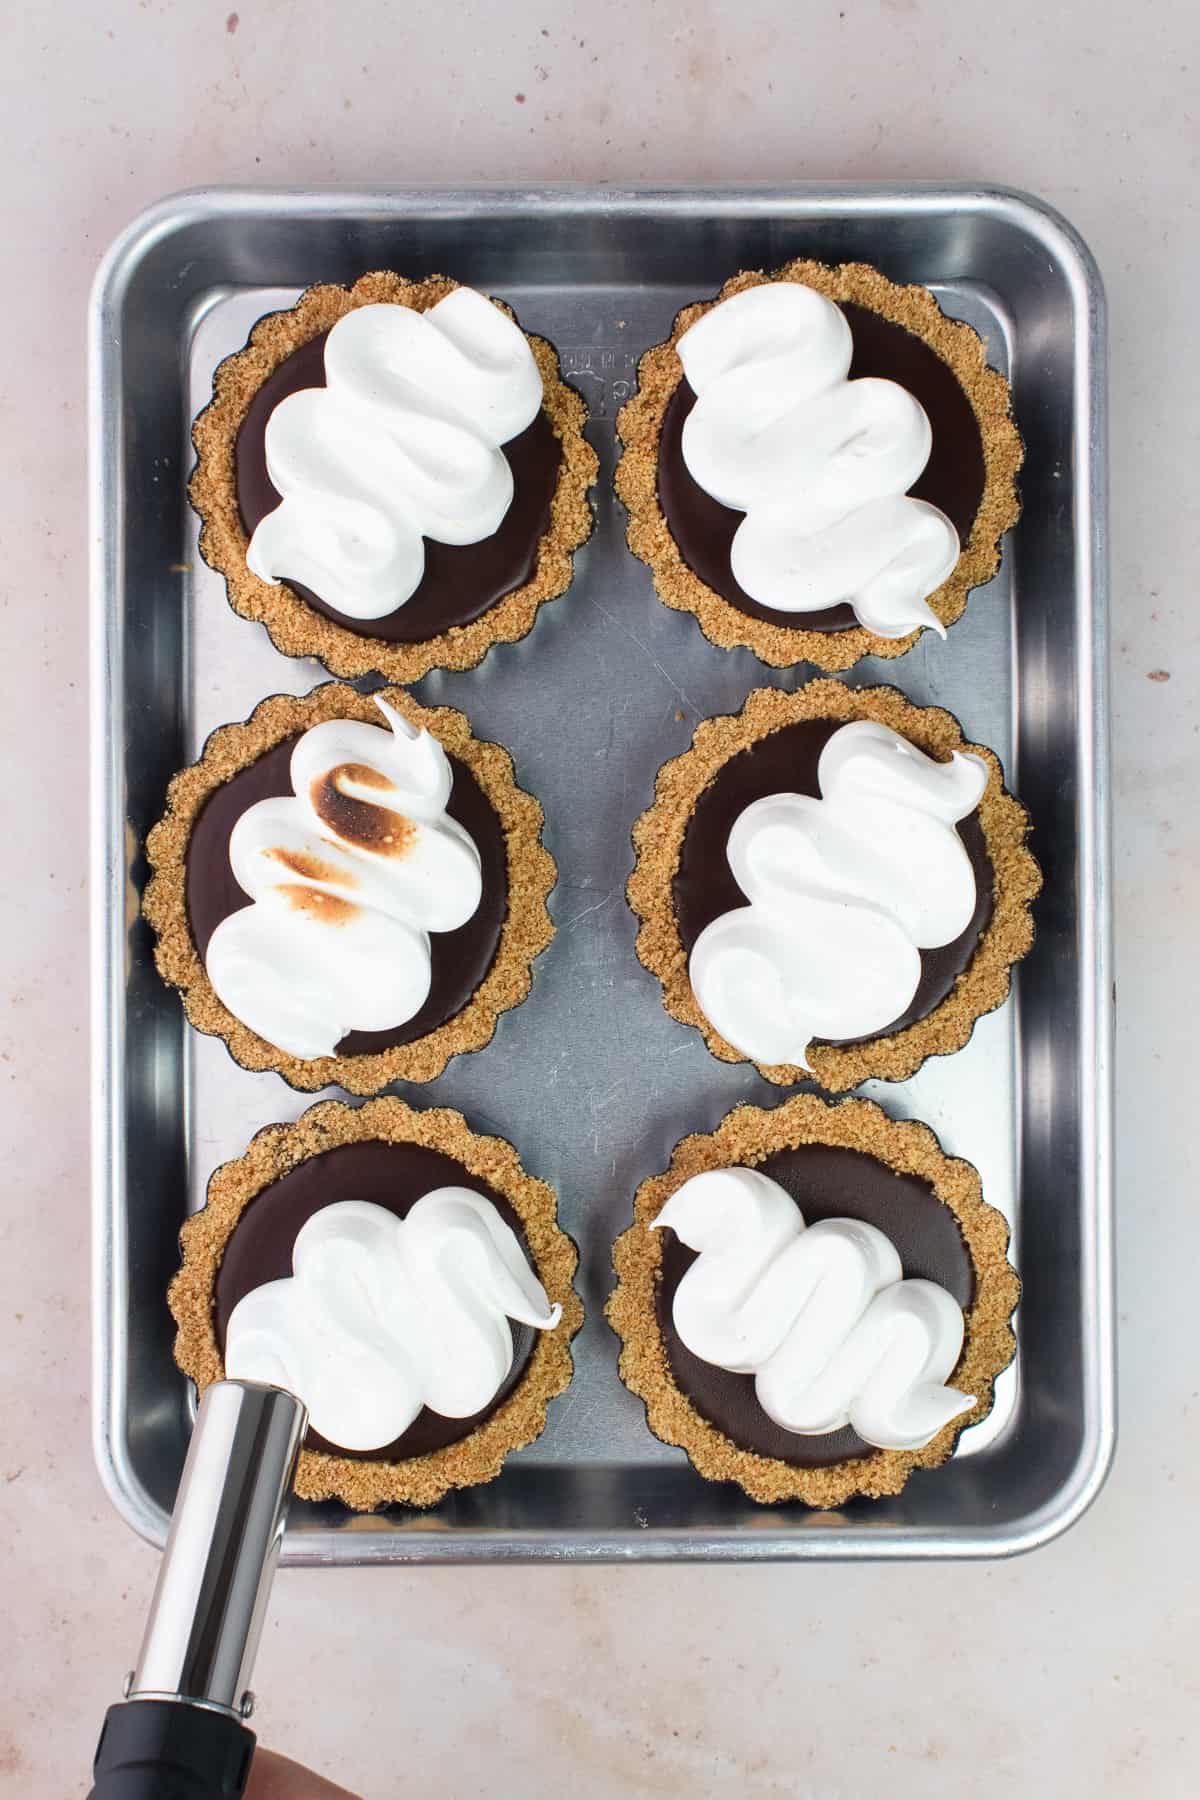 A kitchen torch is torching one of the mini tarts